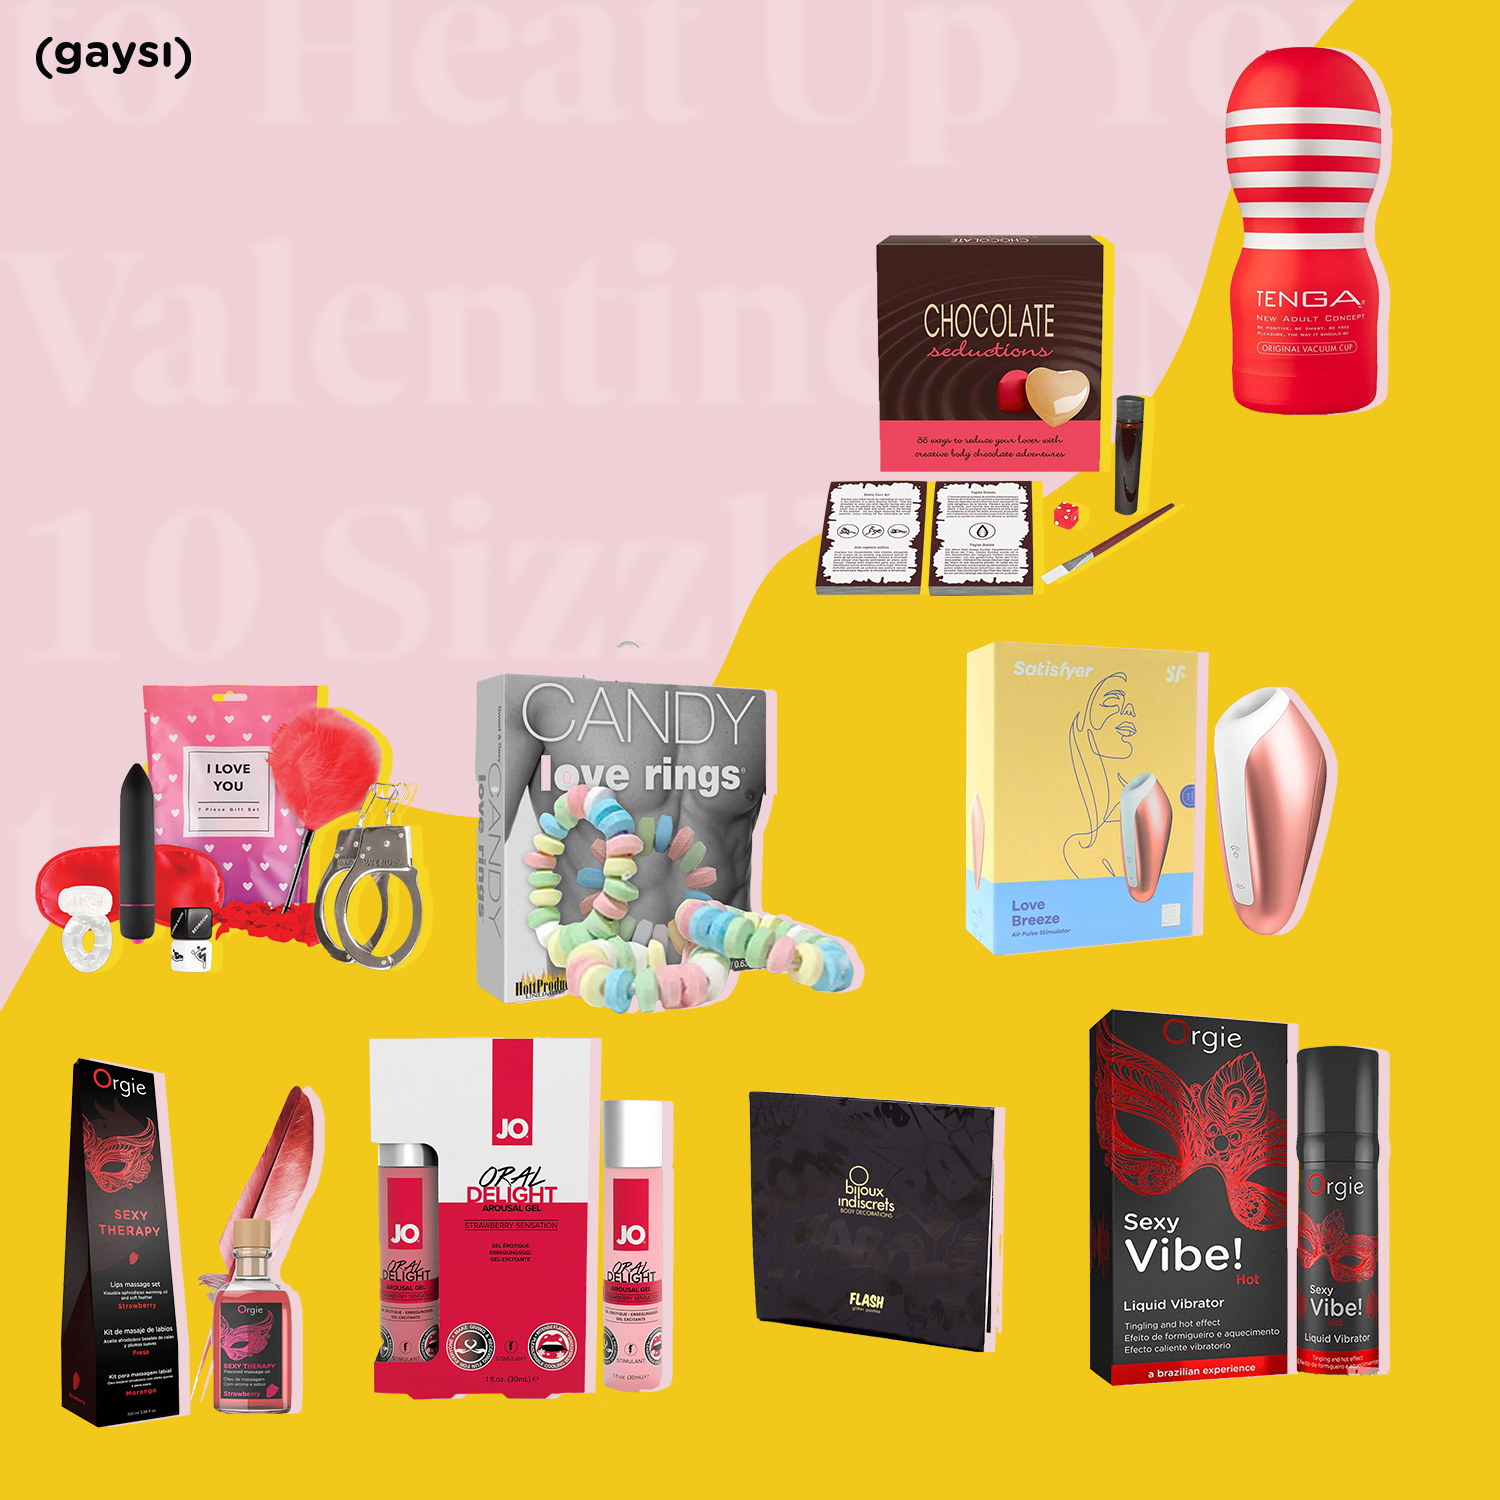 10 Sizzling Toys to Heat Up Your Valentine’s Night